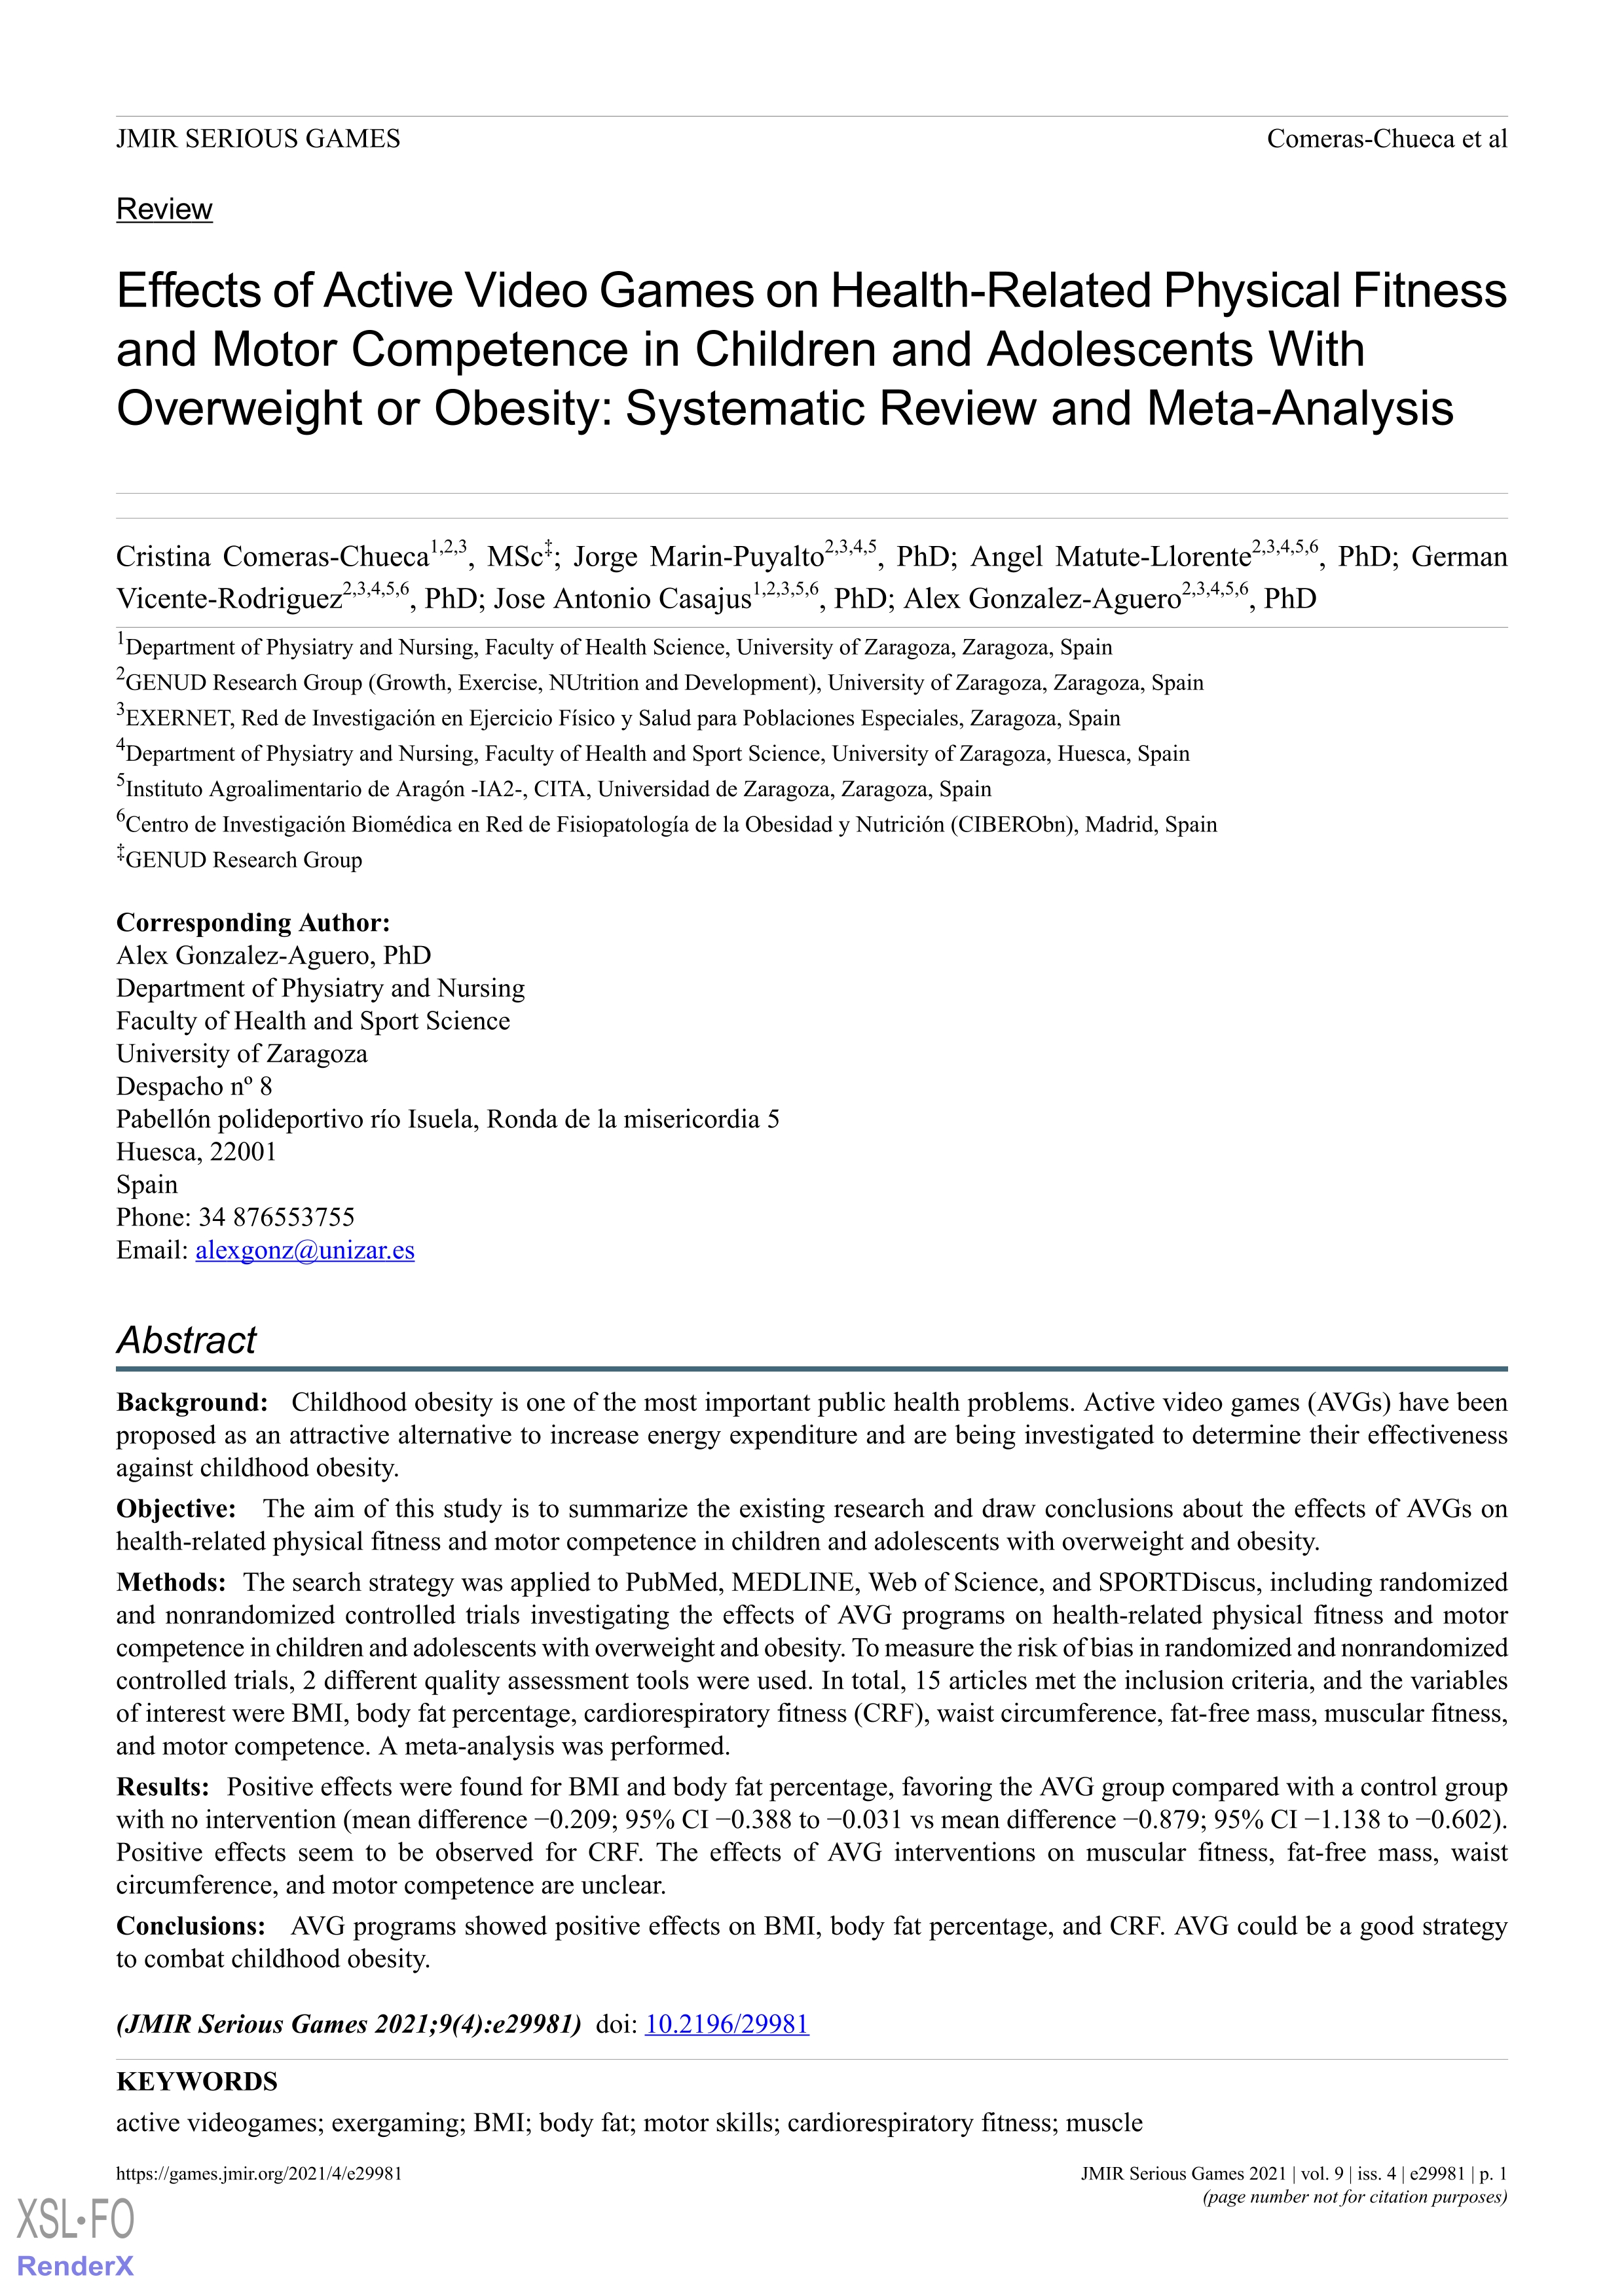 Effects of active video games on health-related physical fitness and motor competence in children and adolescents with overweight or obesity: Systematic review and meta-Analysis